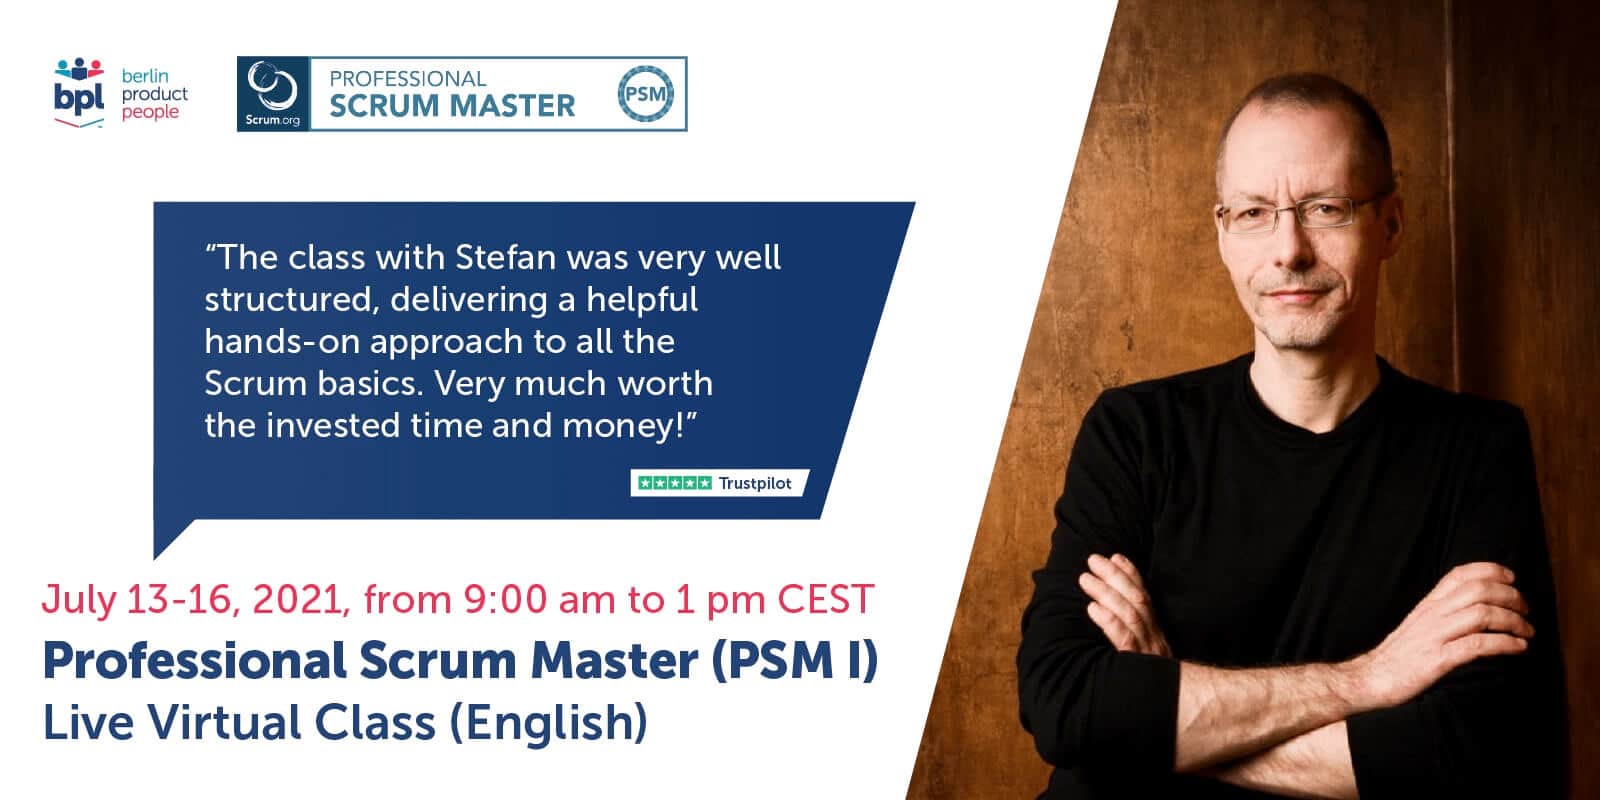 Professional Scrum Master Online Training w/ PSM Certificate — July 13-16, 2021 — Berlin Product People GmbH